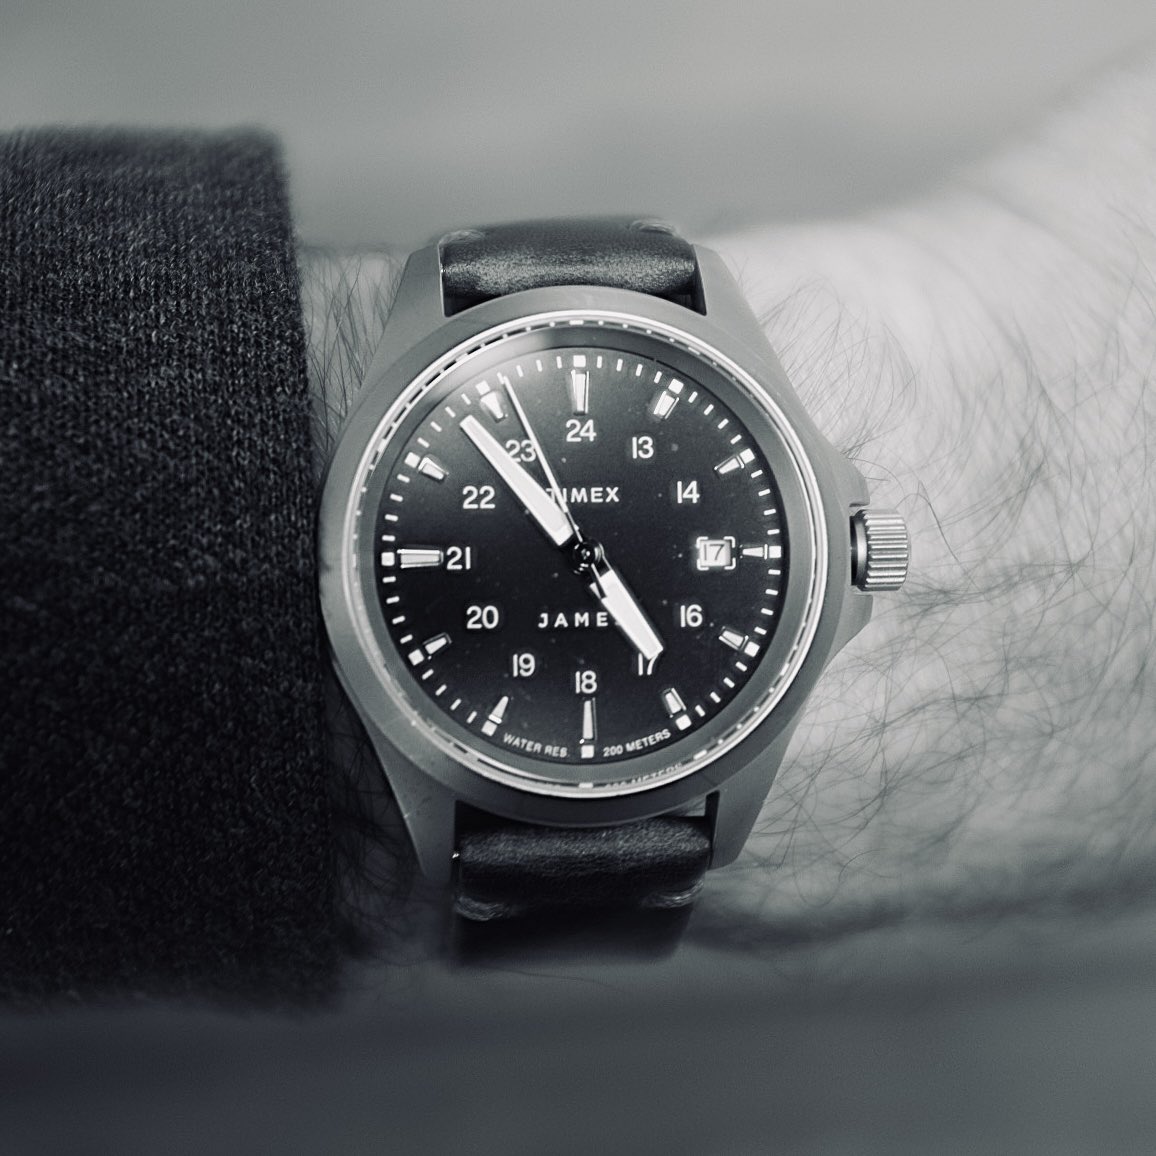 For #watchwednesday I’m wearing @thejamesbrand x @timex Expedition North Titanium 41mm Automatic Watch with Popov Leather strap. Do you prefer the color iPhone photo or the B&W @FujifilmX_US X100T photo?